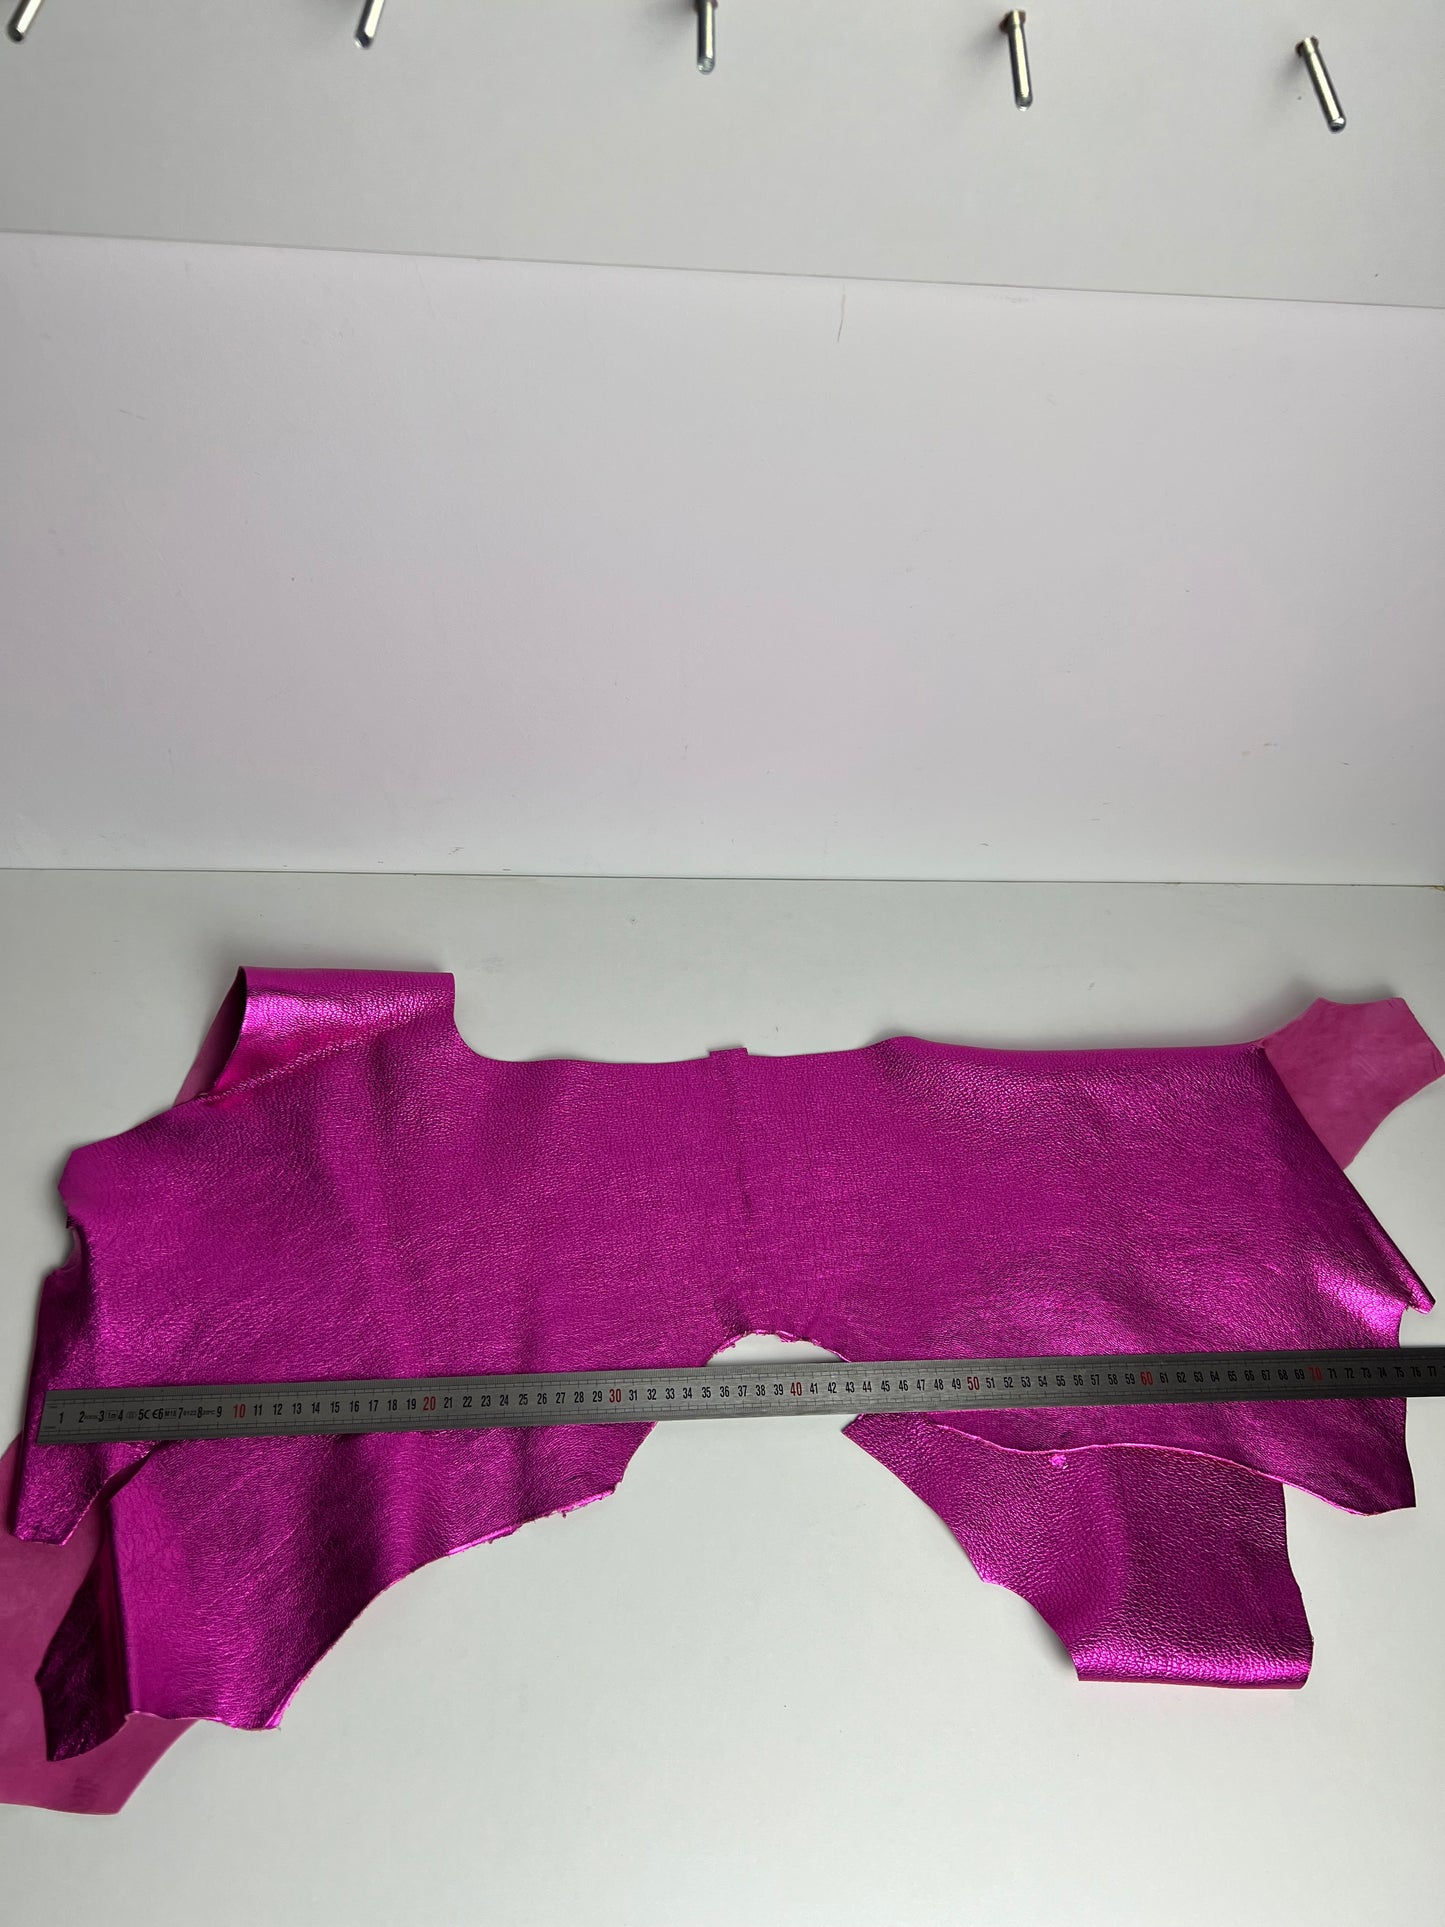 Pieces of Leather, Medium and Large pieces, Color Pink, Nice finish look | 0.8 kg | 1.8 lb